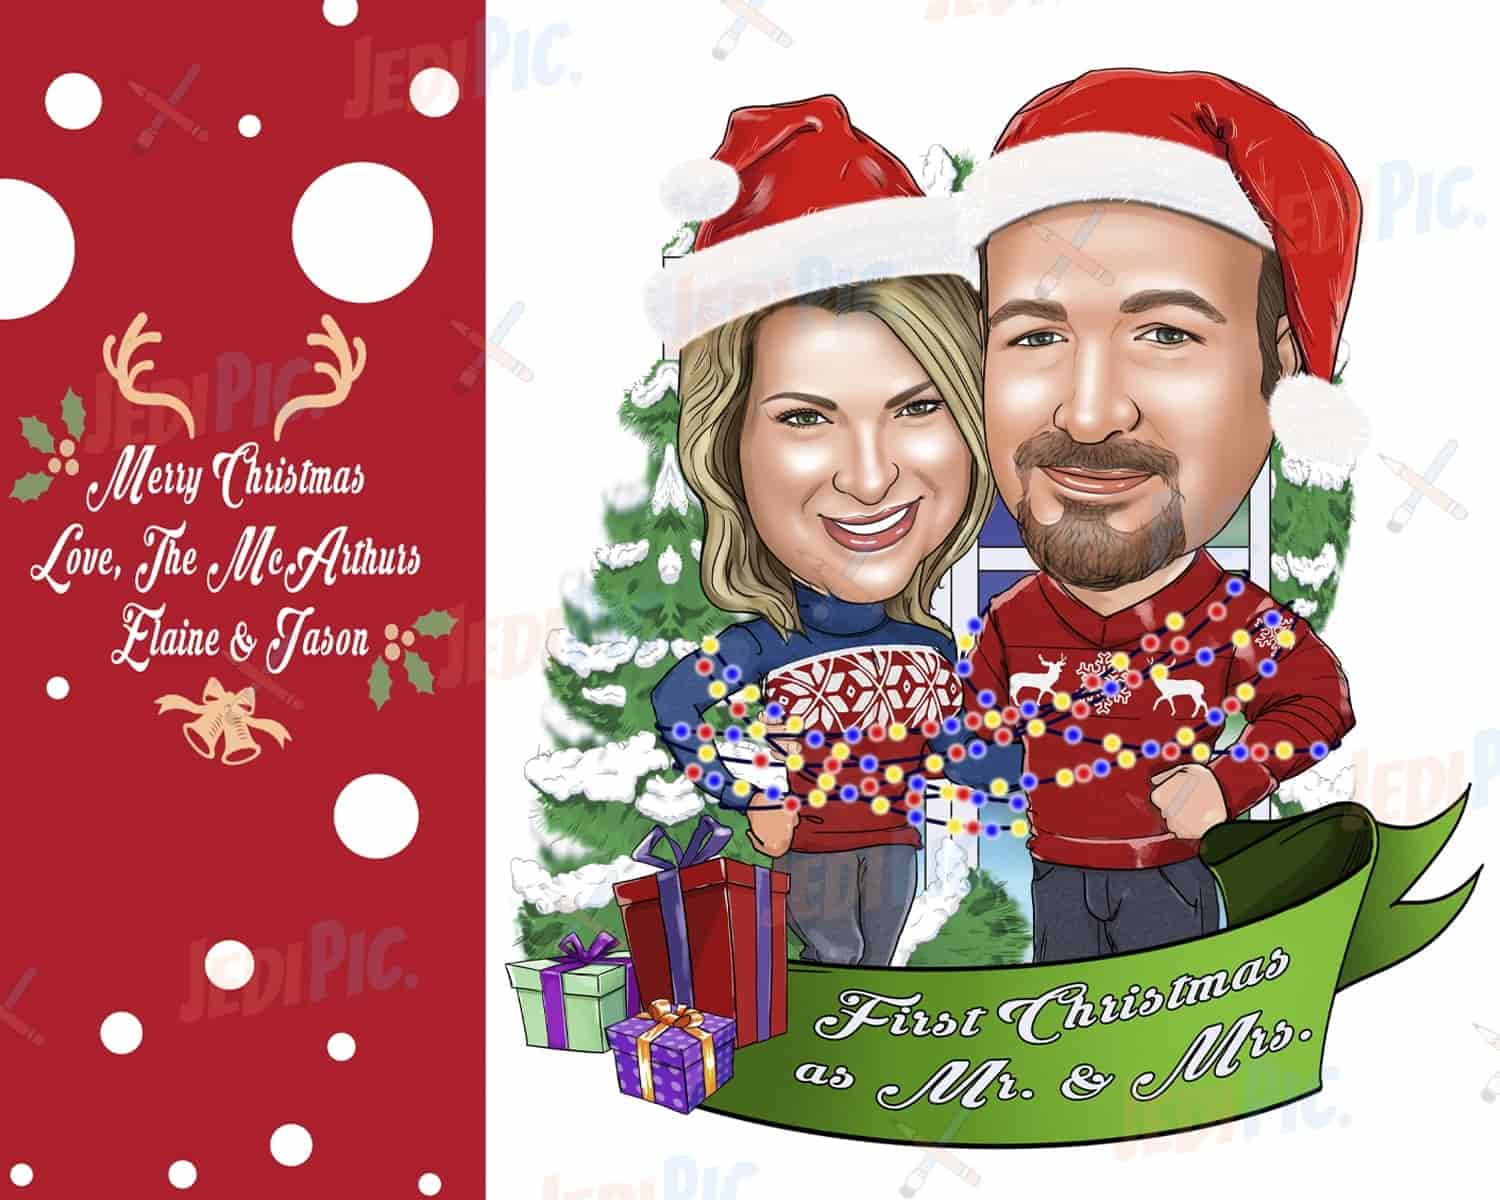 Personalized Christmas Cards Cartoon Caricature